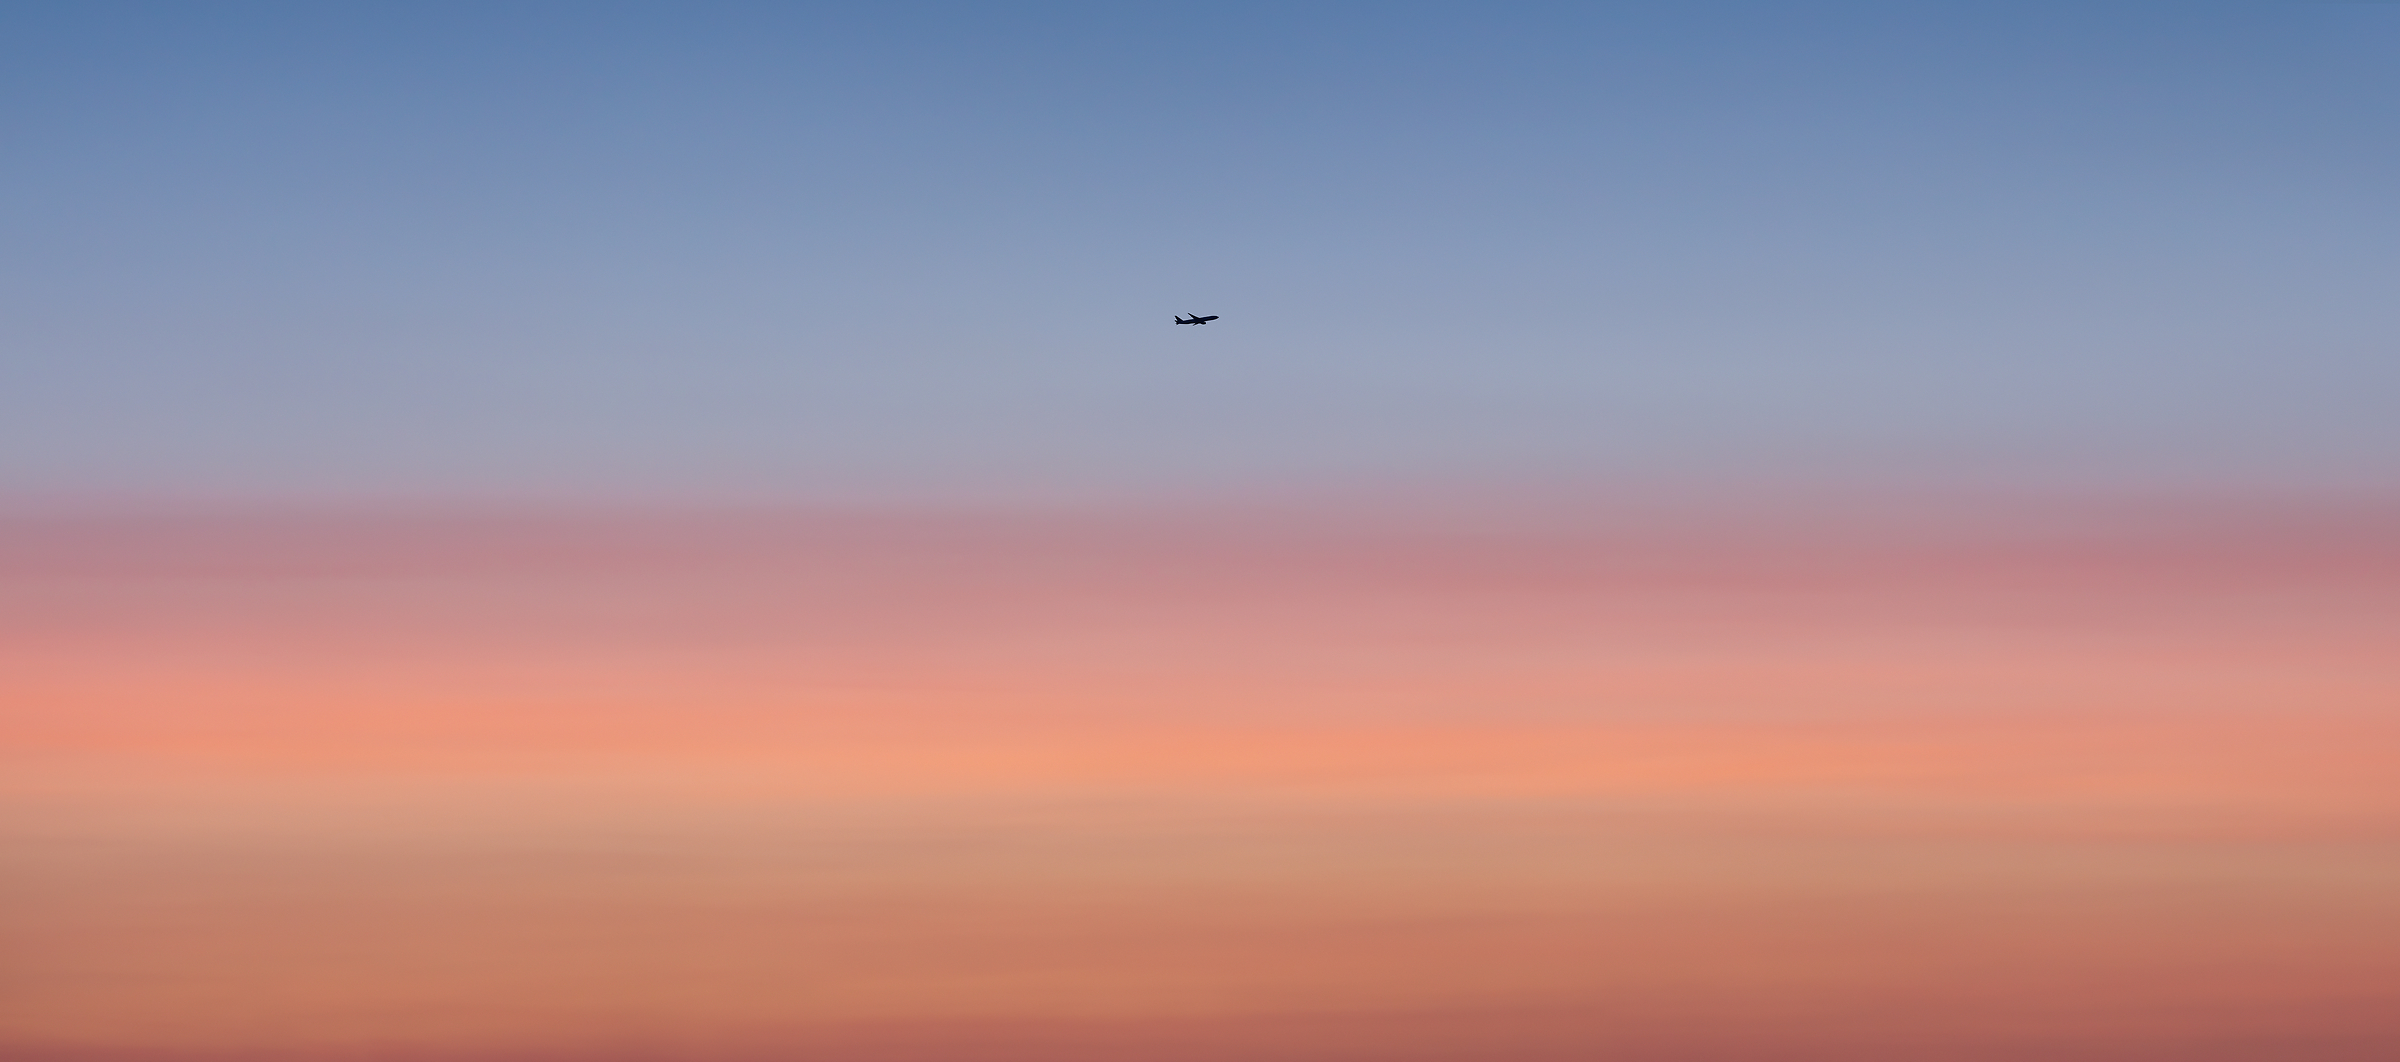 452 megapixels! A very high resolution, large-format VAST photo of an airplane taking off or landing in a vibrant, pastel, colorful sunset; fine art airplane photograph created by Dan Piech in New York City.